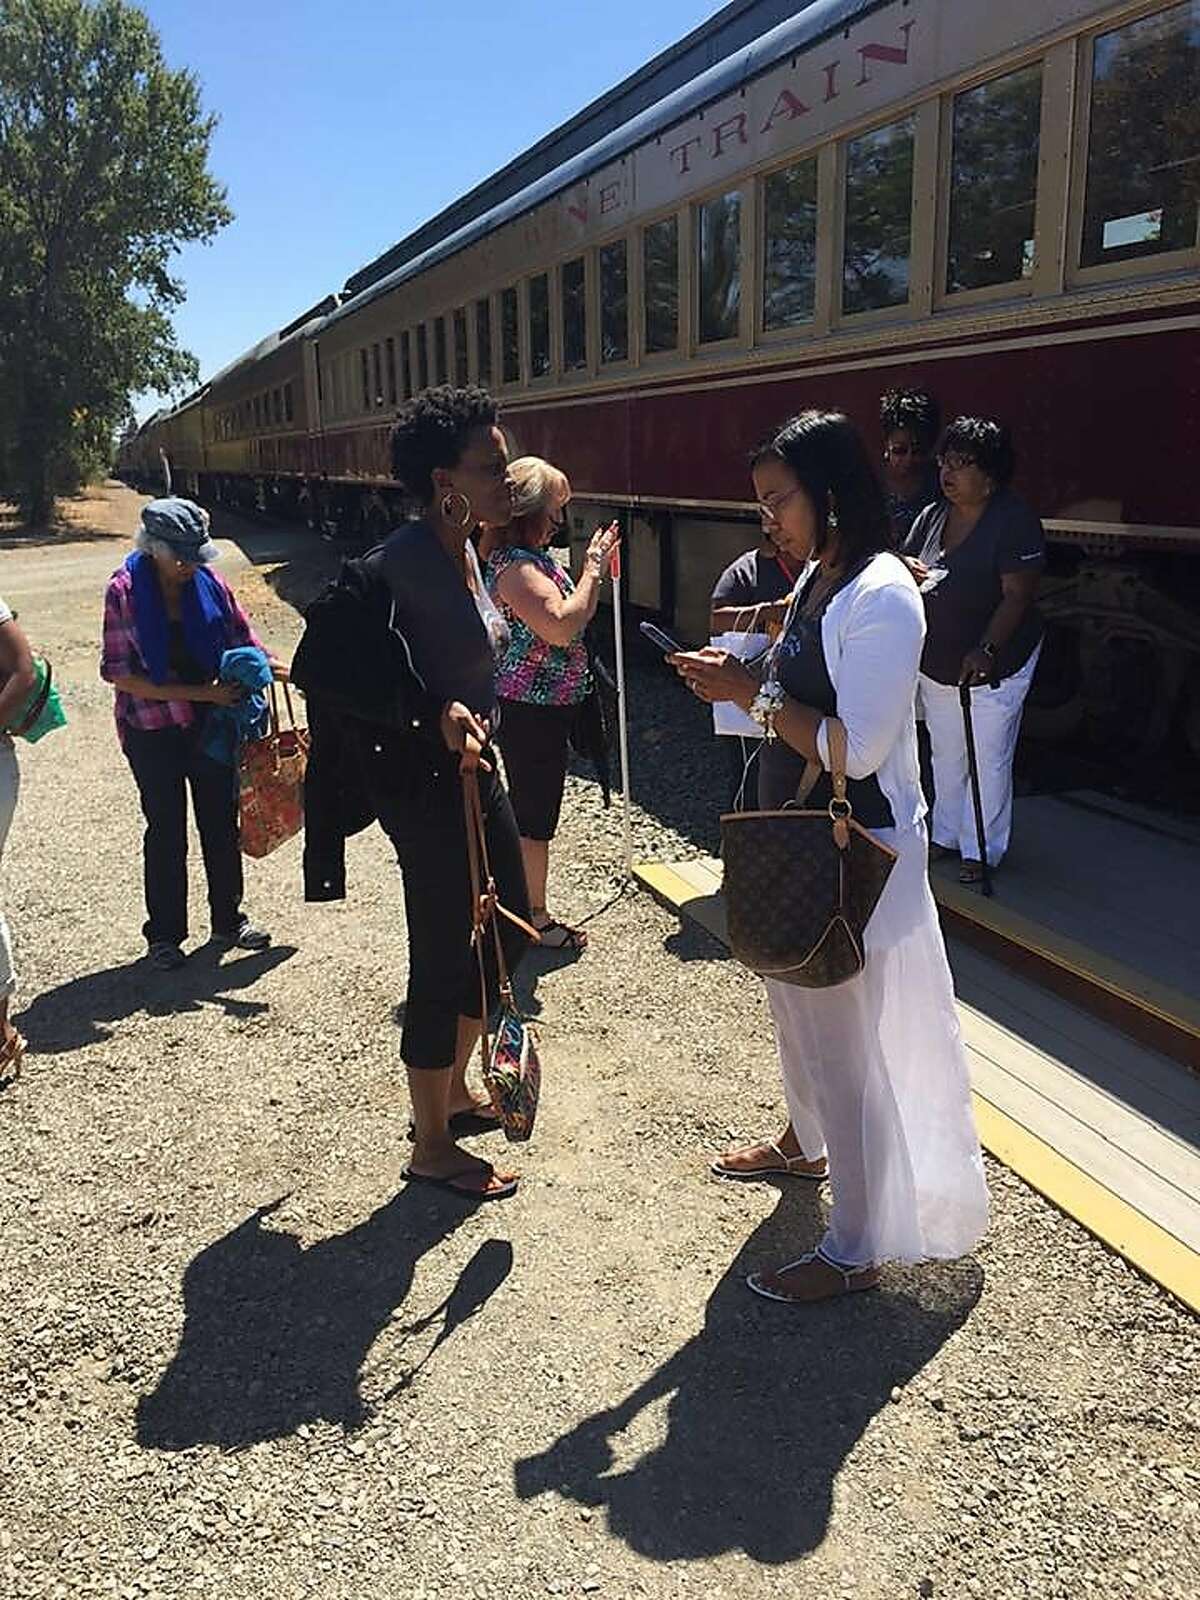 A group of African American women who are part of a book club were kicked off the Napa Valley Wine Train on Saturday.